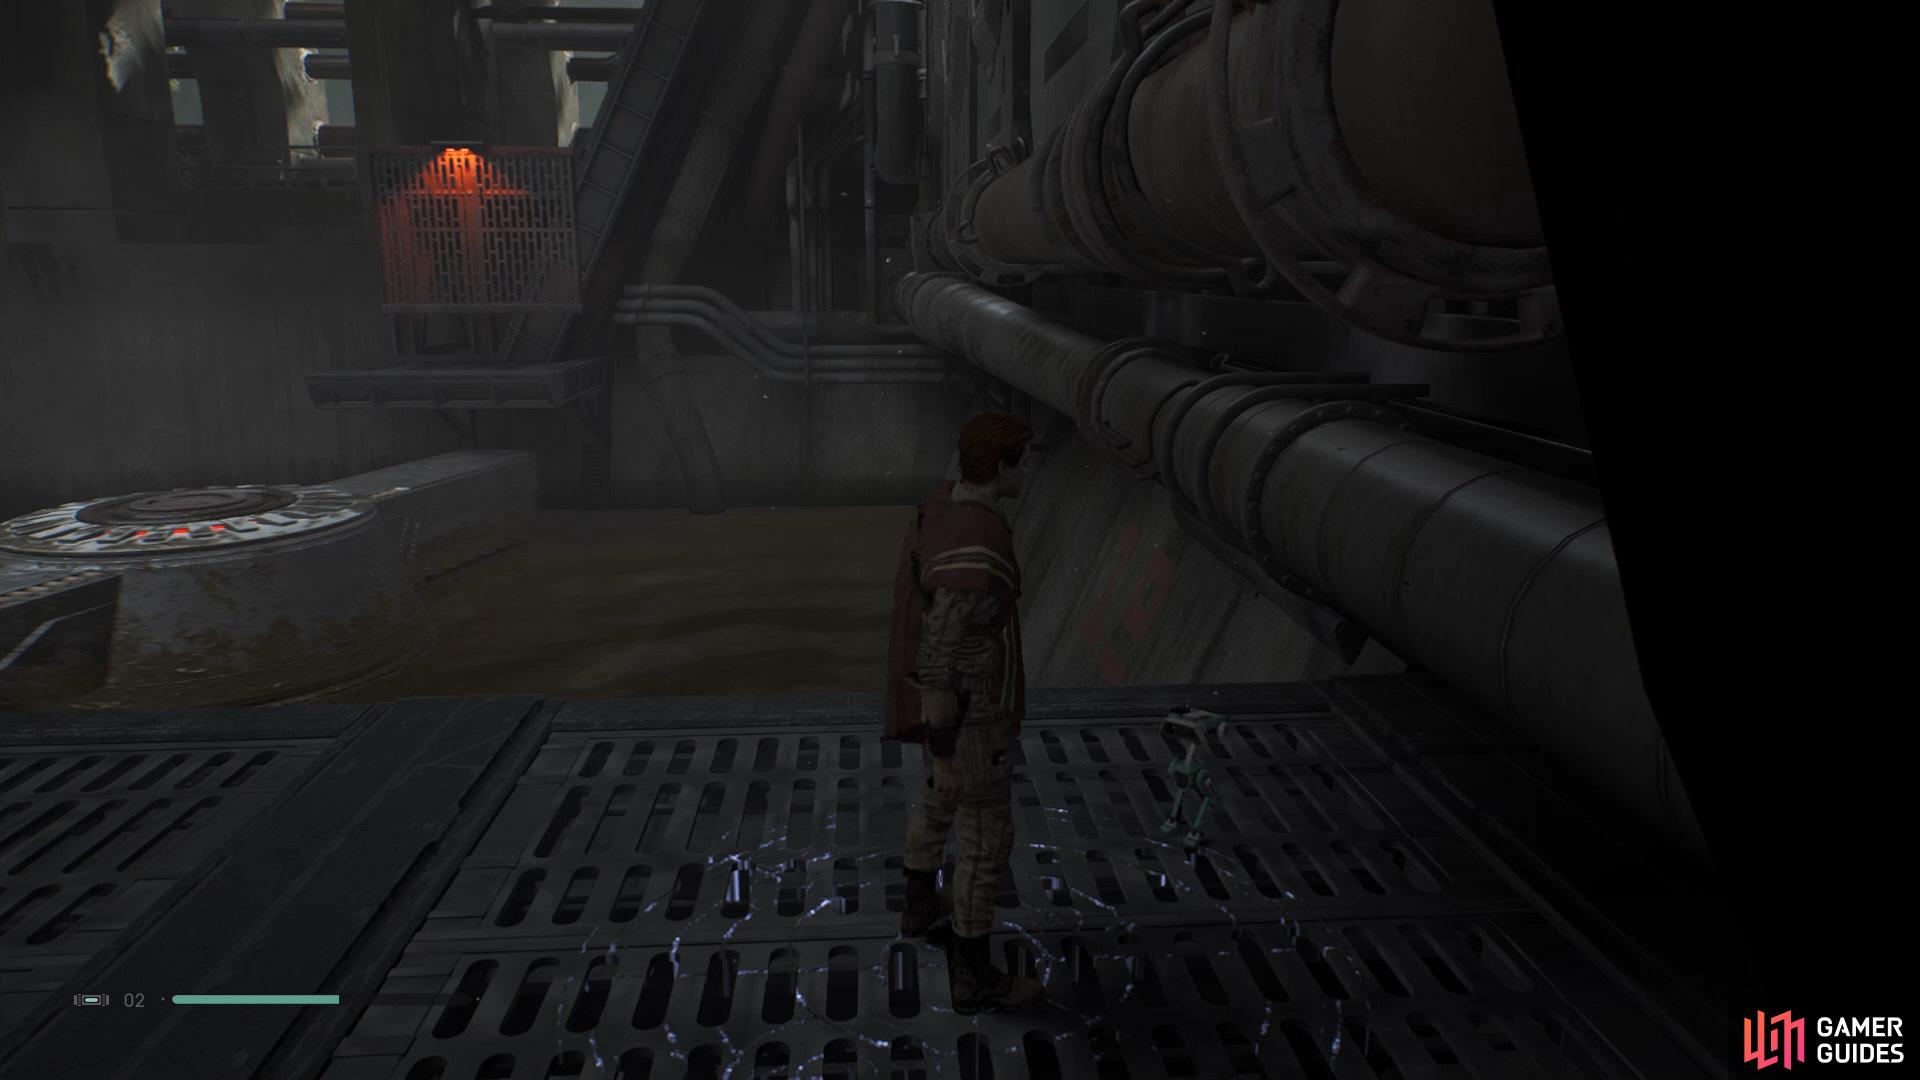 Once you’ve entered the Imperial Refinery and dealt with the Stormtroopers you’ll be able to drop down to the right to find a Meditation Point.